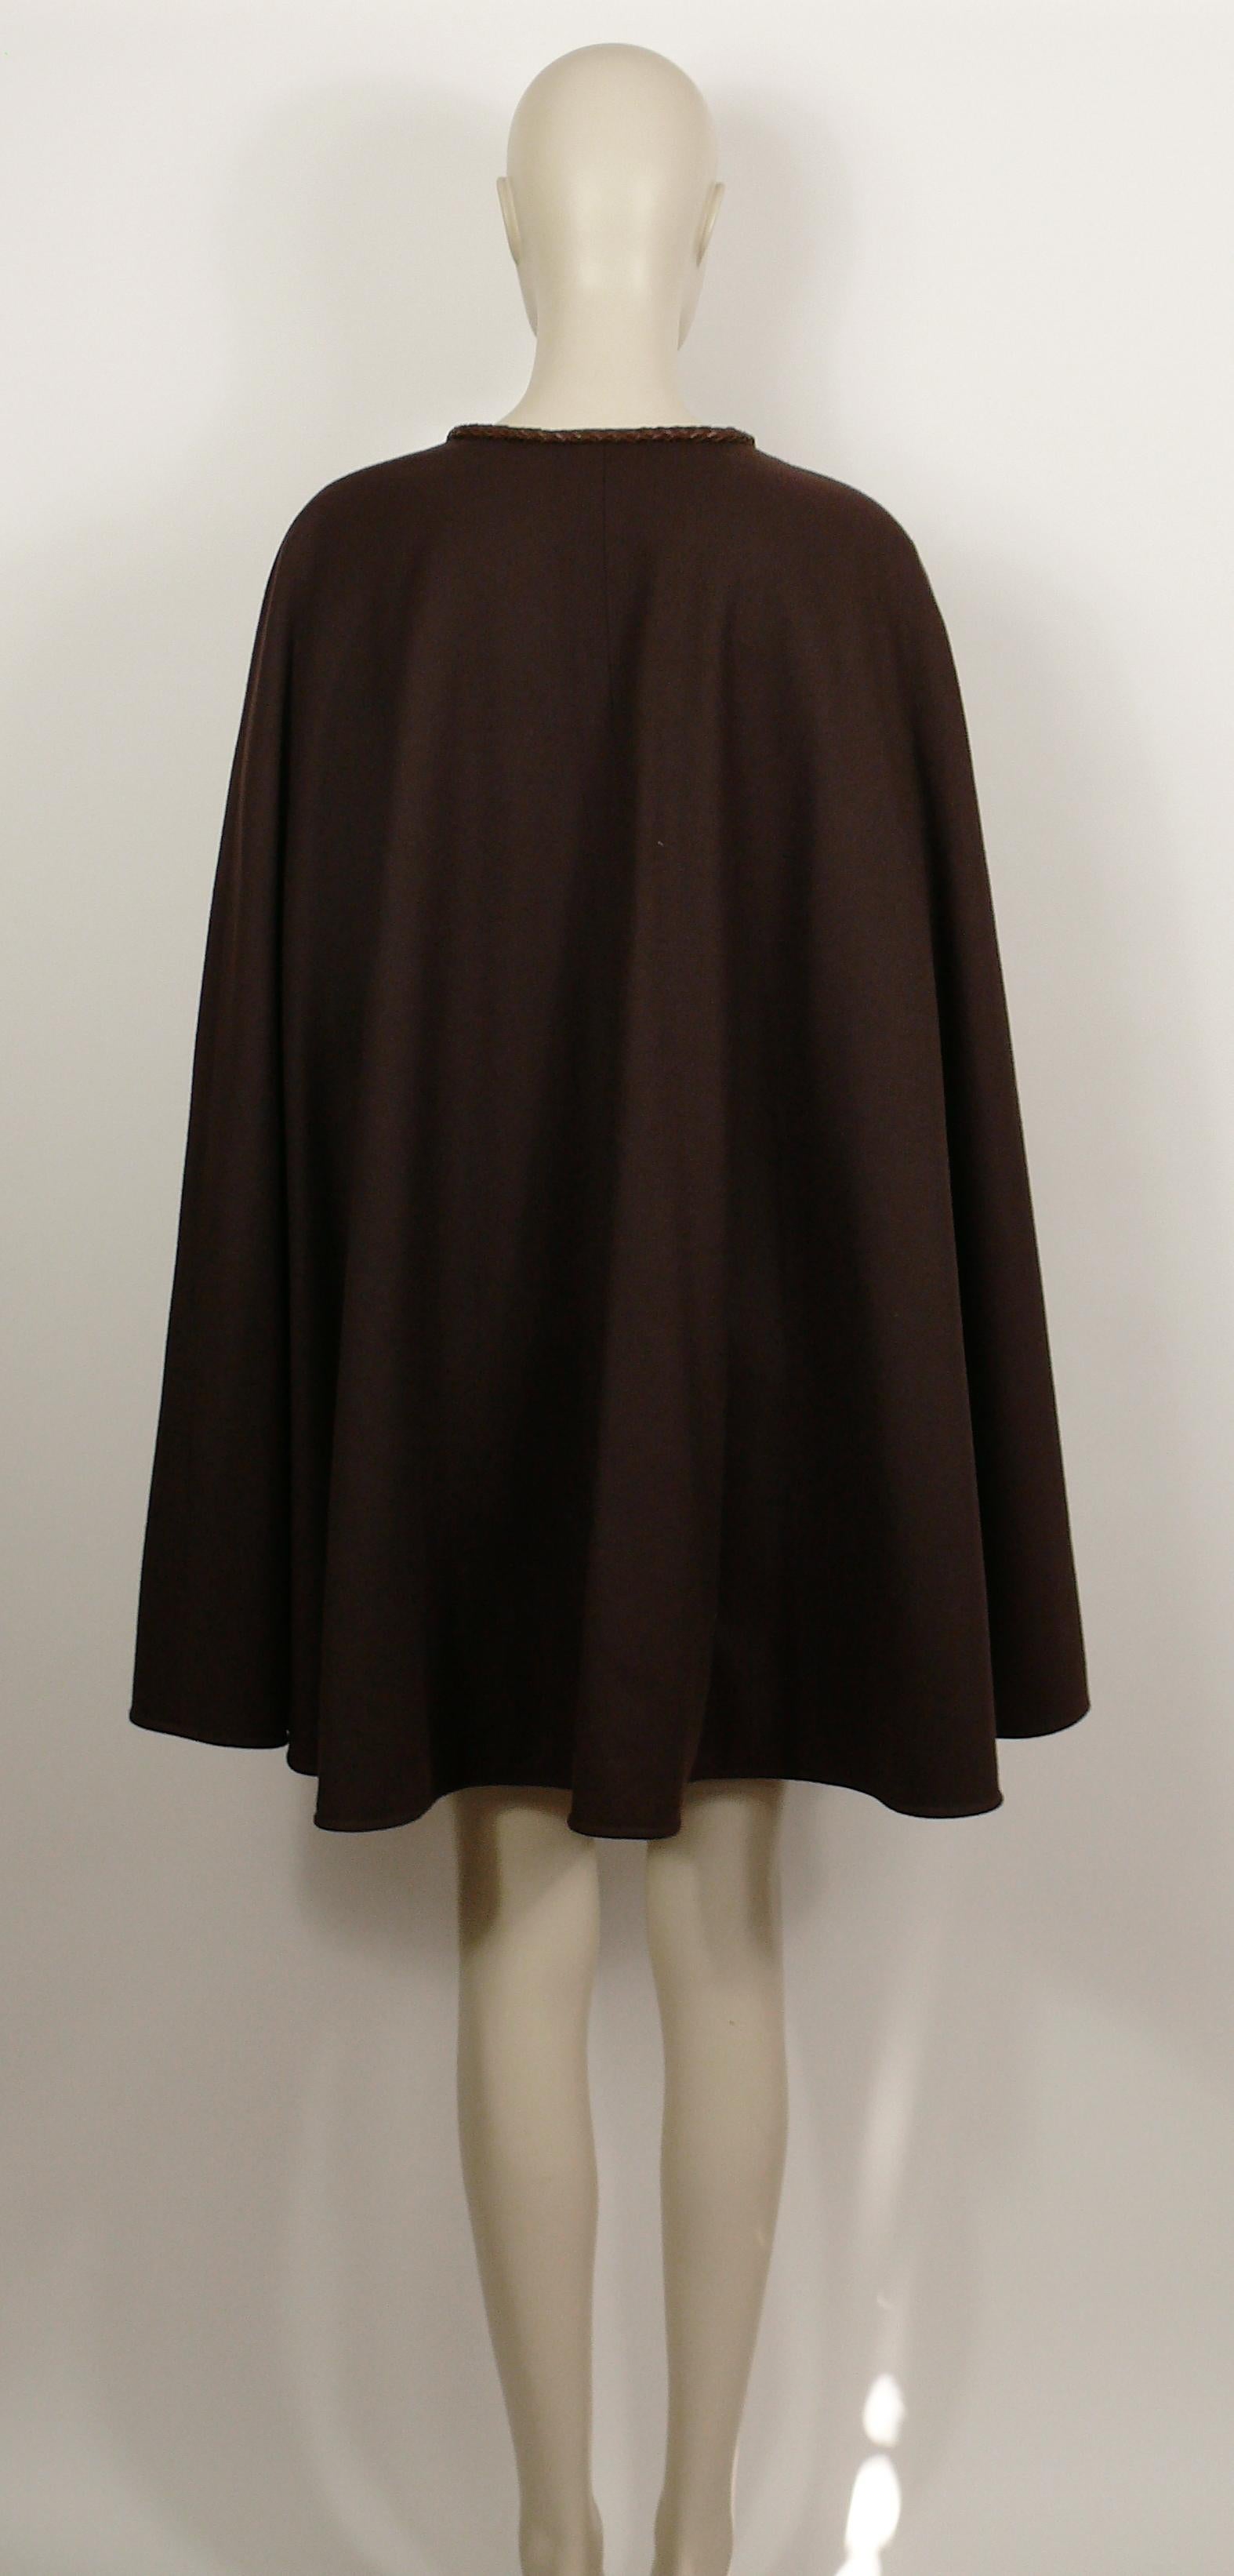 Yves Saint Laurent Rive Gauche Vintage Brown Cape with Leather Tassels 1